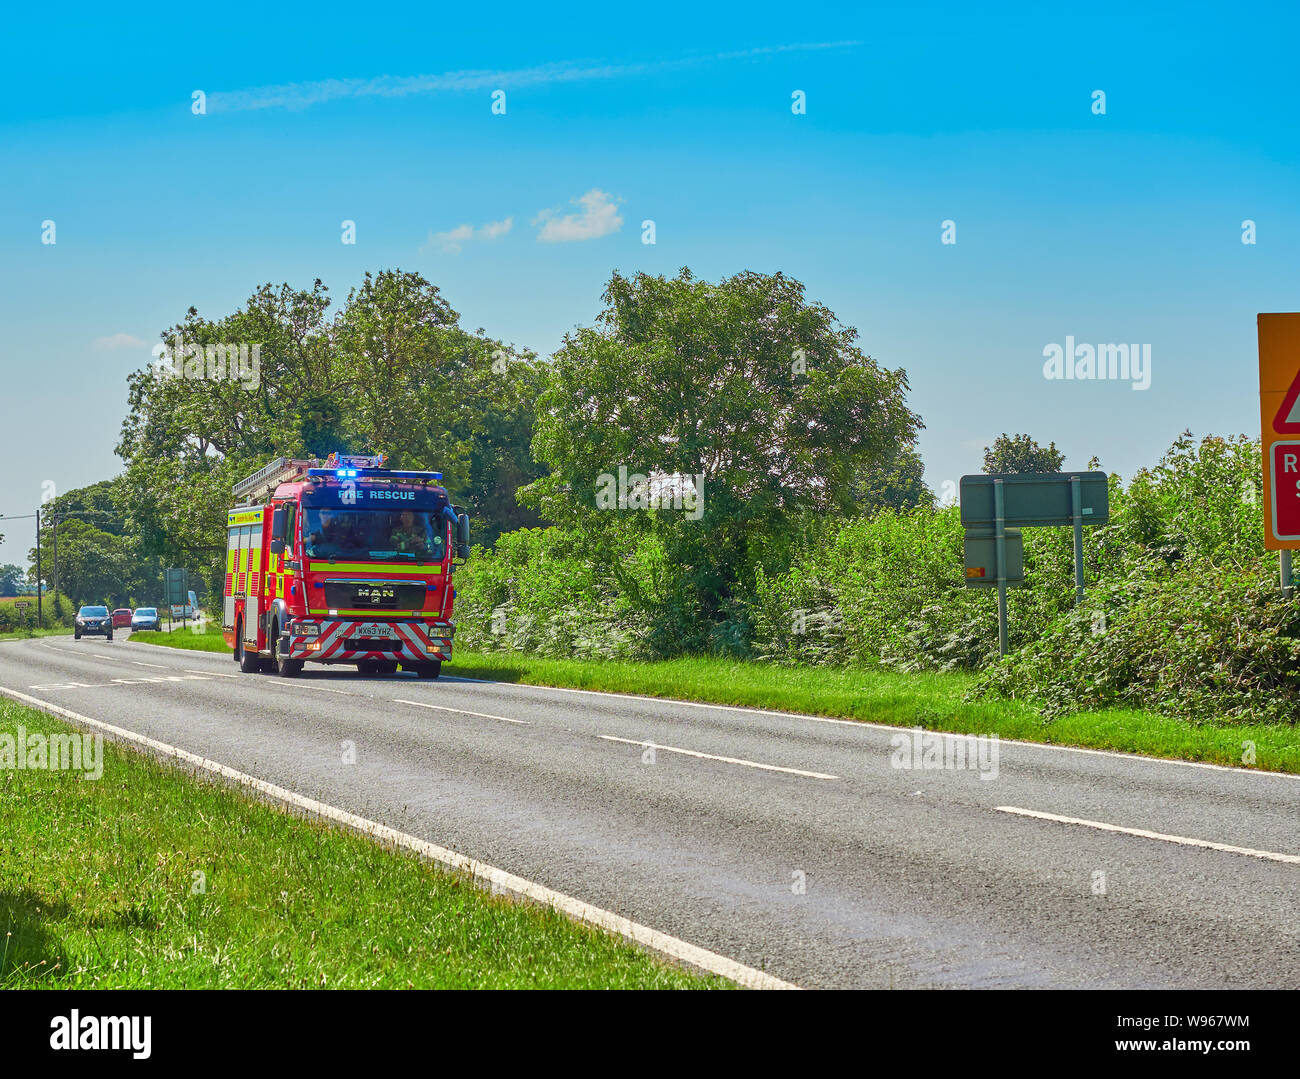 A fire engine from Lincolnshire Fire and Rescue fire brigade racing down the A52 near Ropsley in Lincolnshire under blue light conditions Stock Photo